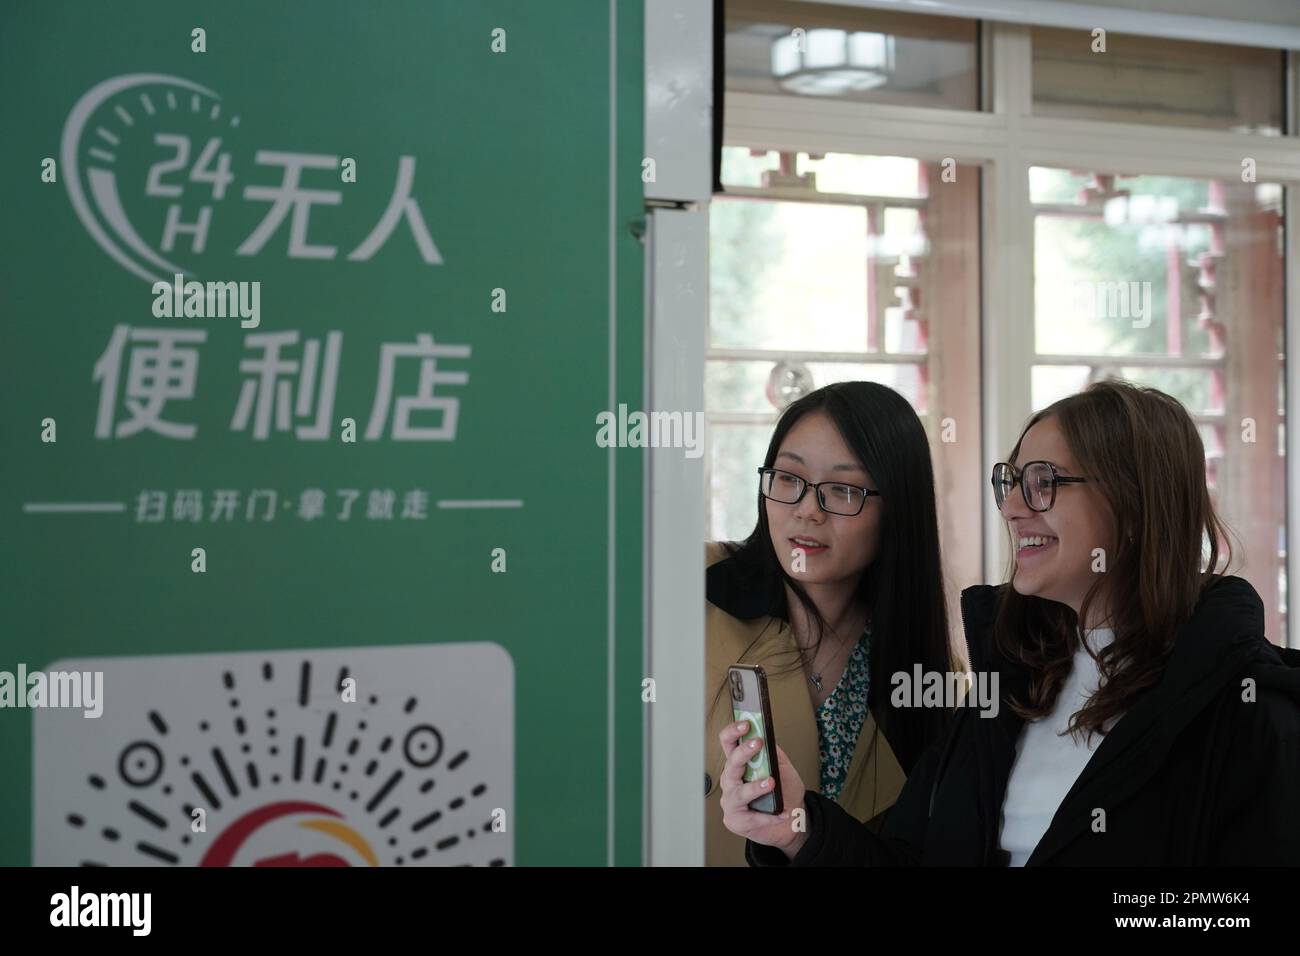 (230415) -- BEIJING, April 15, 2023 (Xinhua) -- Maria (R) scans a QR code on a vending machine at the Yenching Academy of Peking University in Beijing, capital of China, April 13, 2023. Maria Eduarda Variani, Rafaela Viana dos Santos, Manuela Boiteux Pestana, and Marco Andre Rocha Germano are Brazilian students studying in the Master of China Studies program at the Yenching Academy of Peking University in China. The four of them have been interested in Chinese culture since they were young. After arriving in Beijing, they have been impressed by the Chinese capital's profound cultural herit Stock Photo